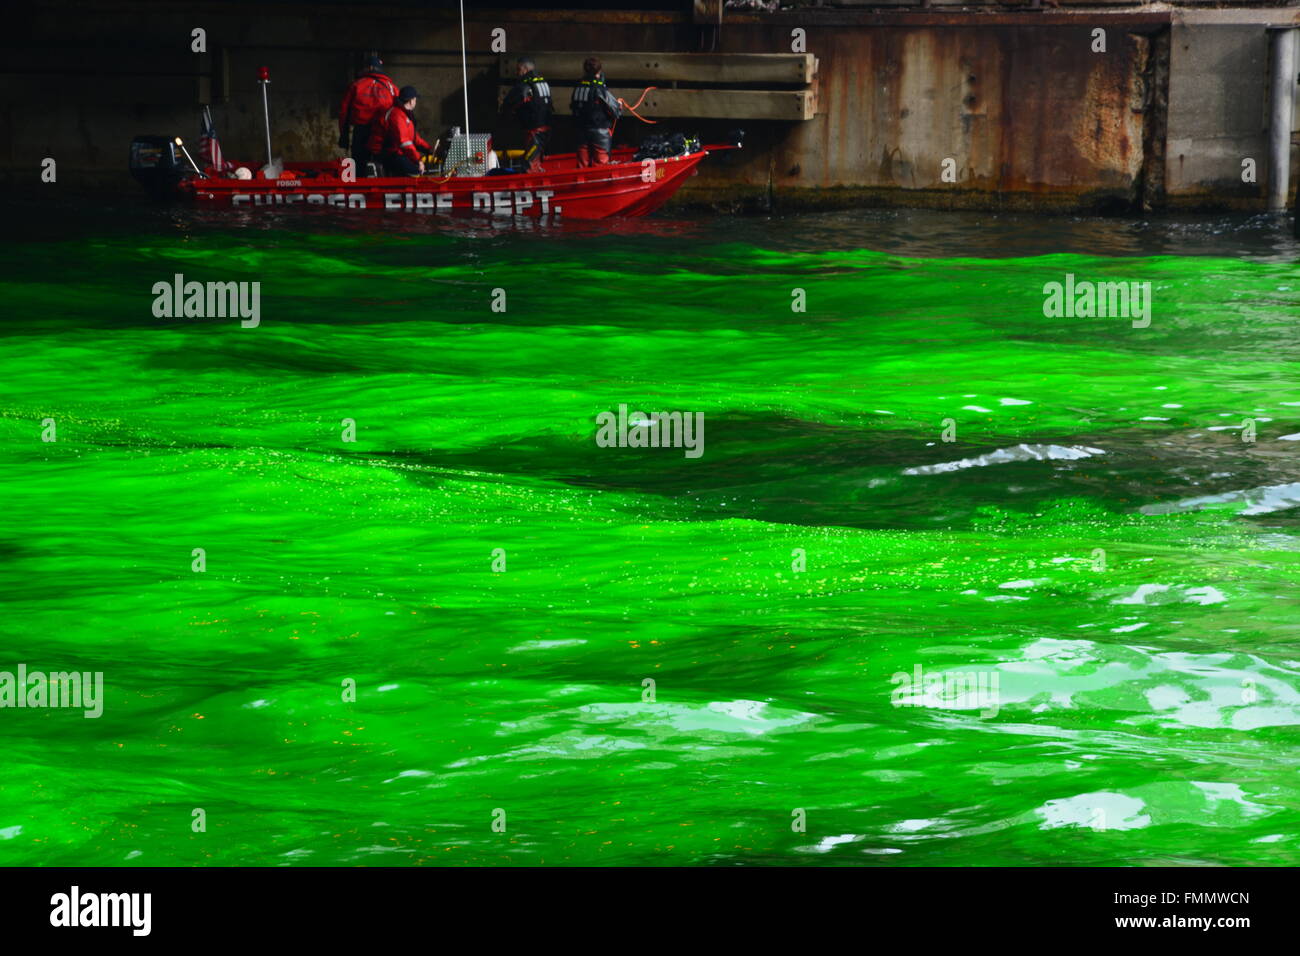 The Chicago Fire Dept divers are near during the annual dying the Chicago River green for St. Patrick's Day, 3/12/2016 Stock Photo